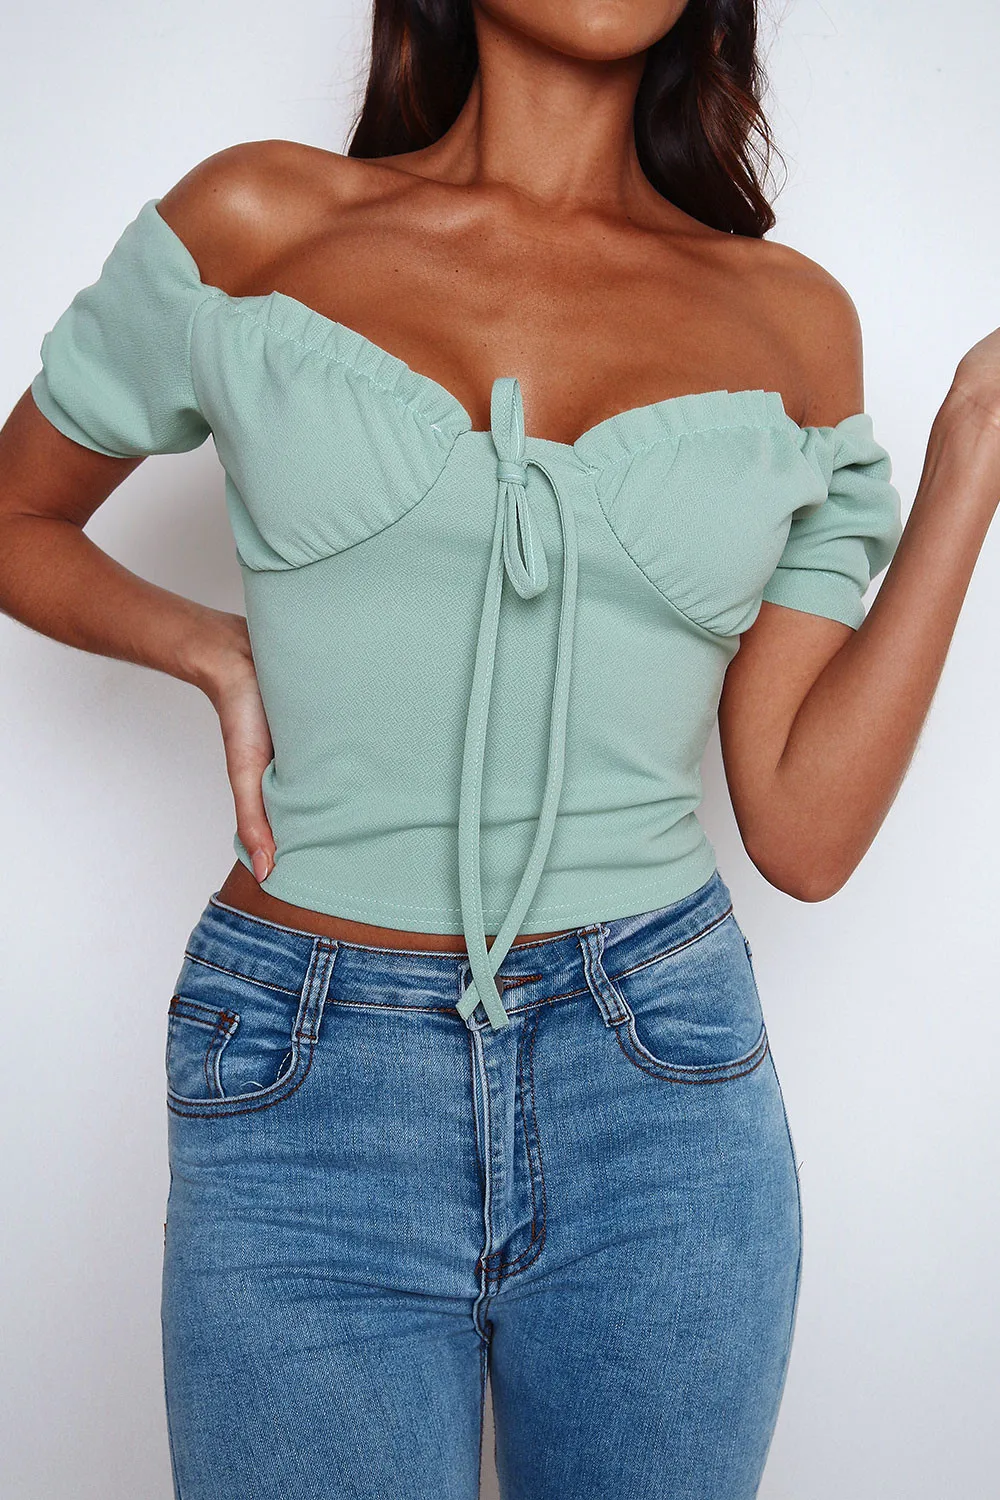 Newest Women lady solid crop tops Hot summer off shoulder bandage short sleeve shirt Strapless Casual Tank Top Club Camis